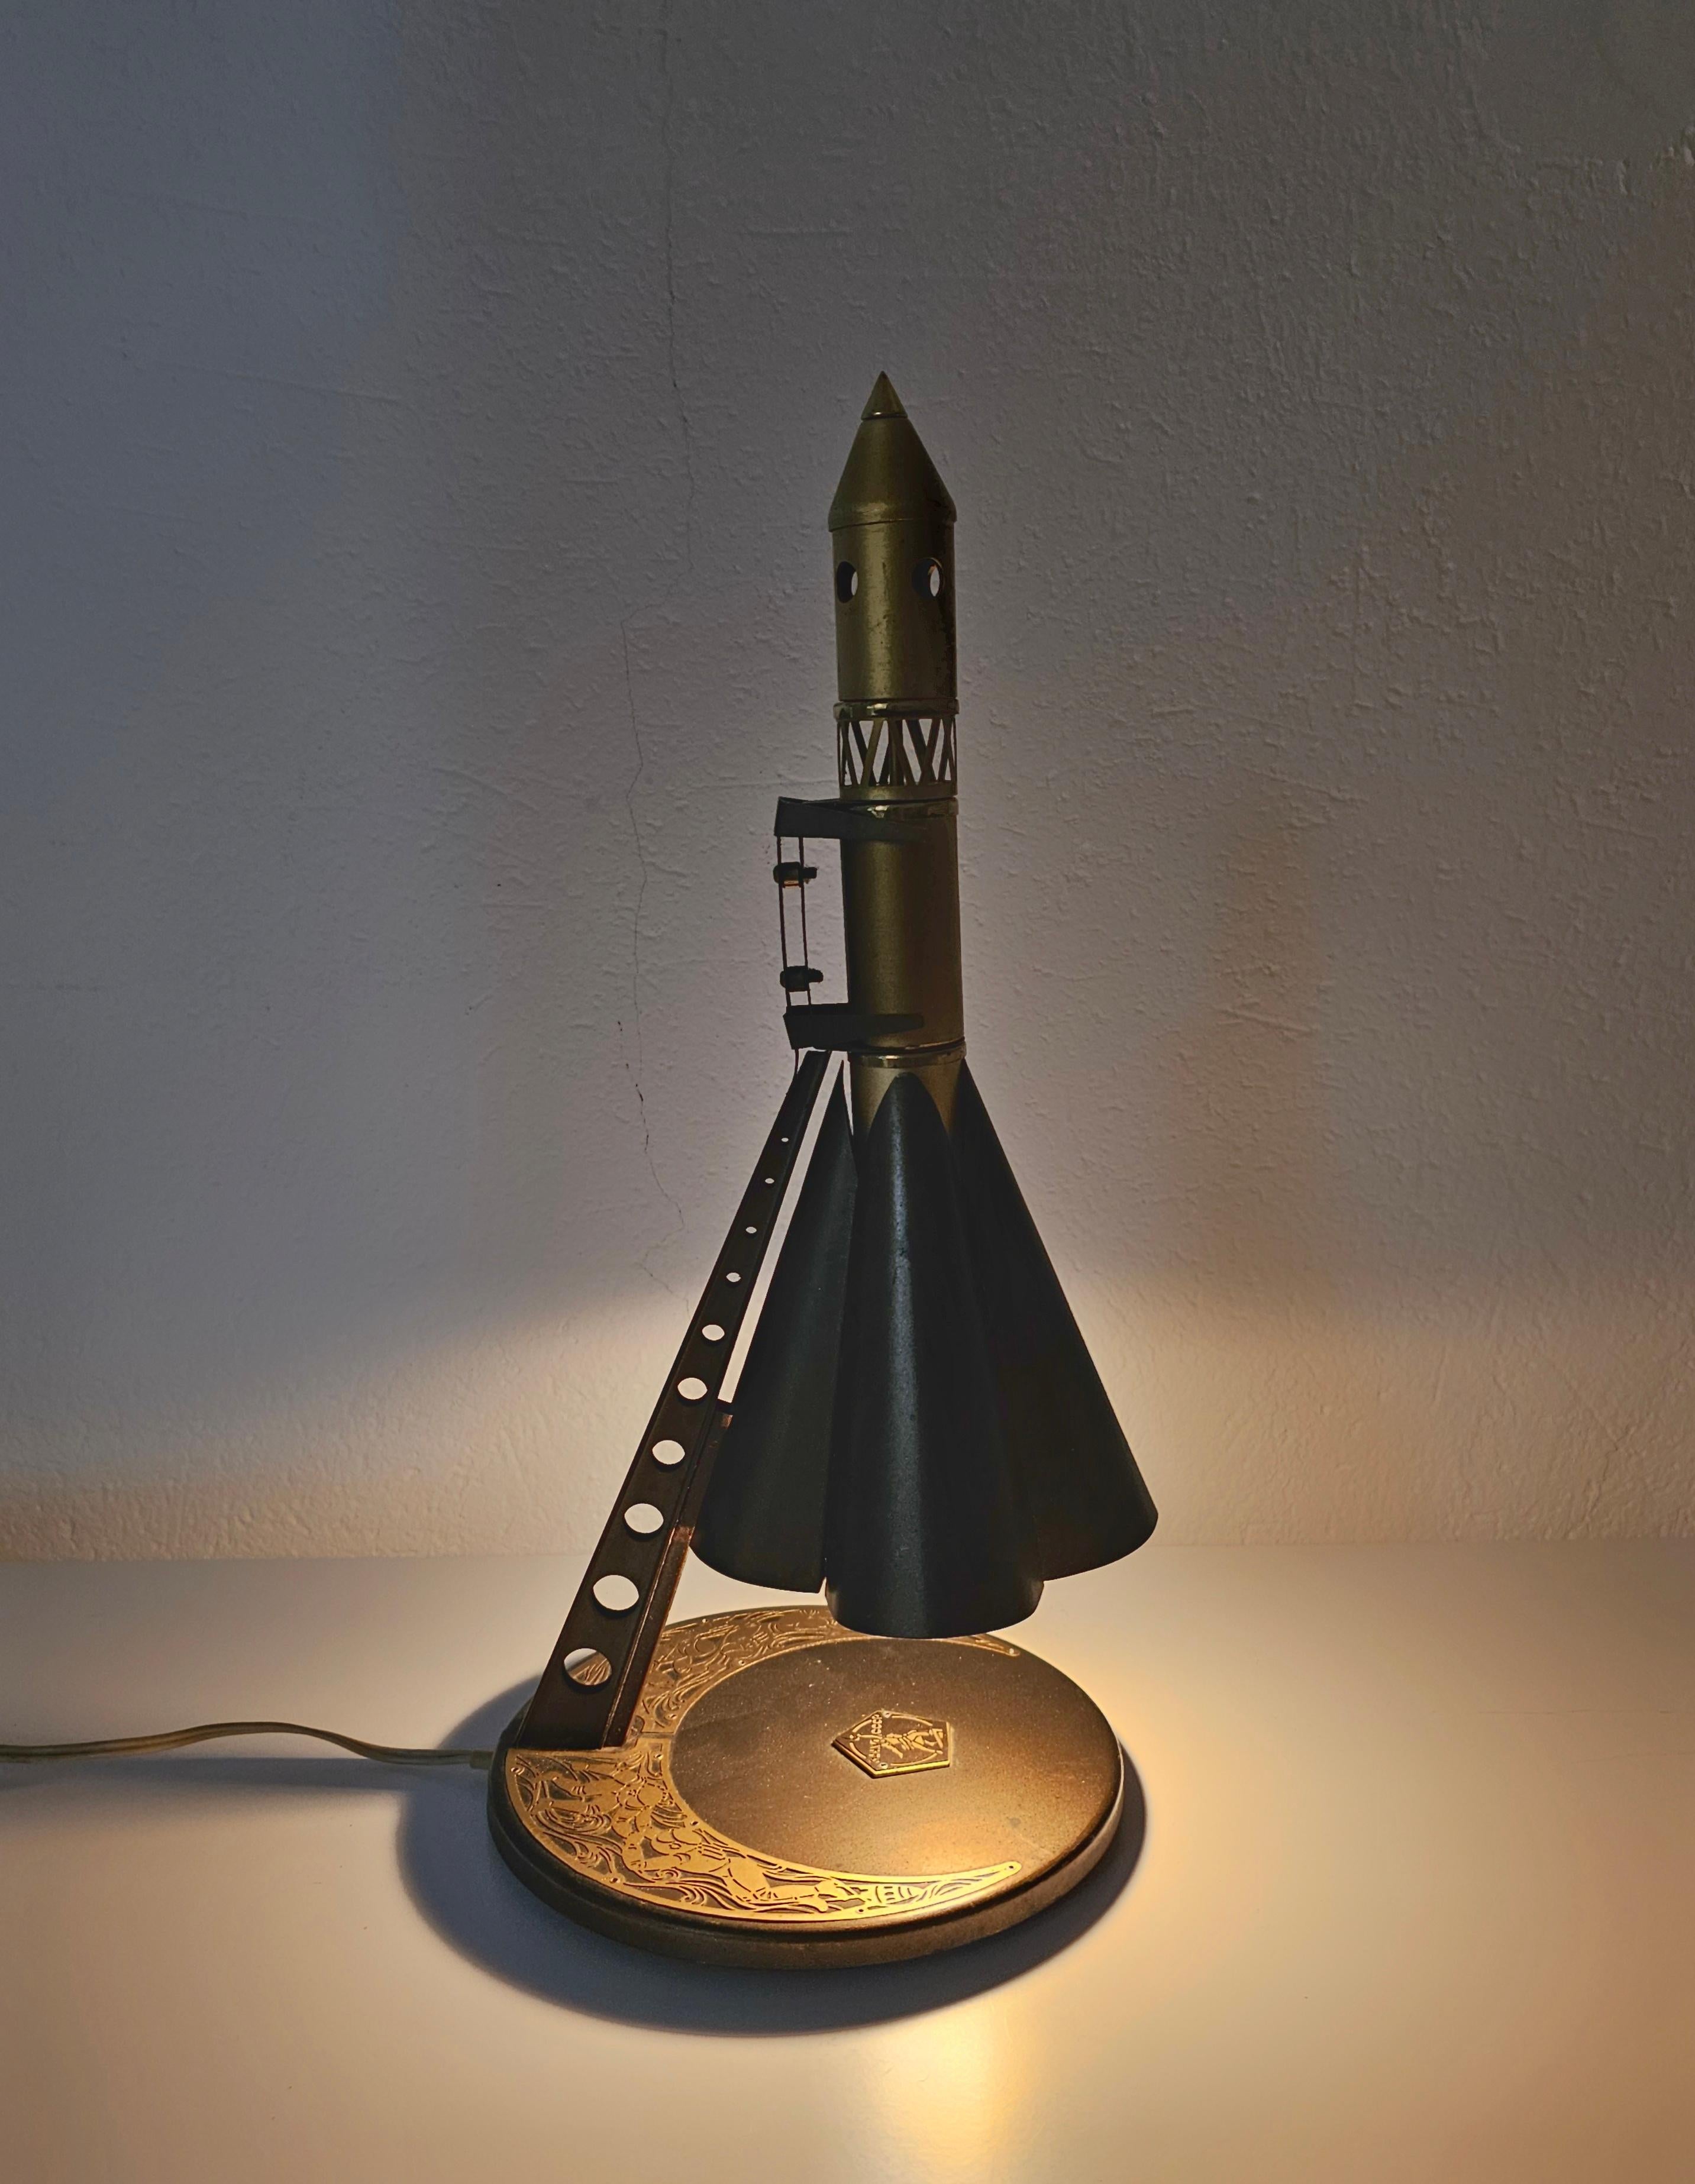 In this listing you will find an exceptionally rare, limited edition Soviet Union Souvenir desk lamp - START. The lamp is made of metal in the early 1960s, inspired and devoted to the first flight to space by Yuri Gagarin on VOSTOK rocket. 

The